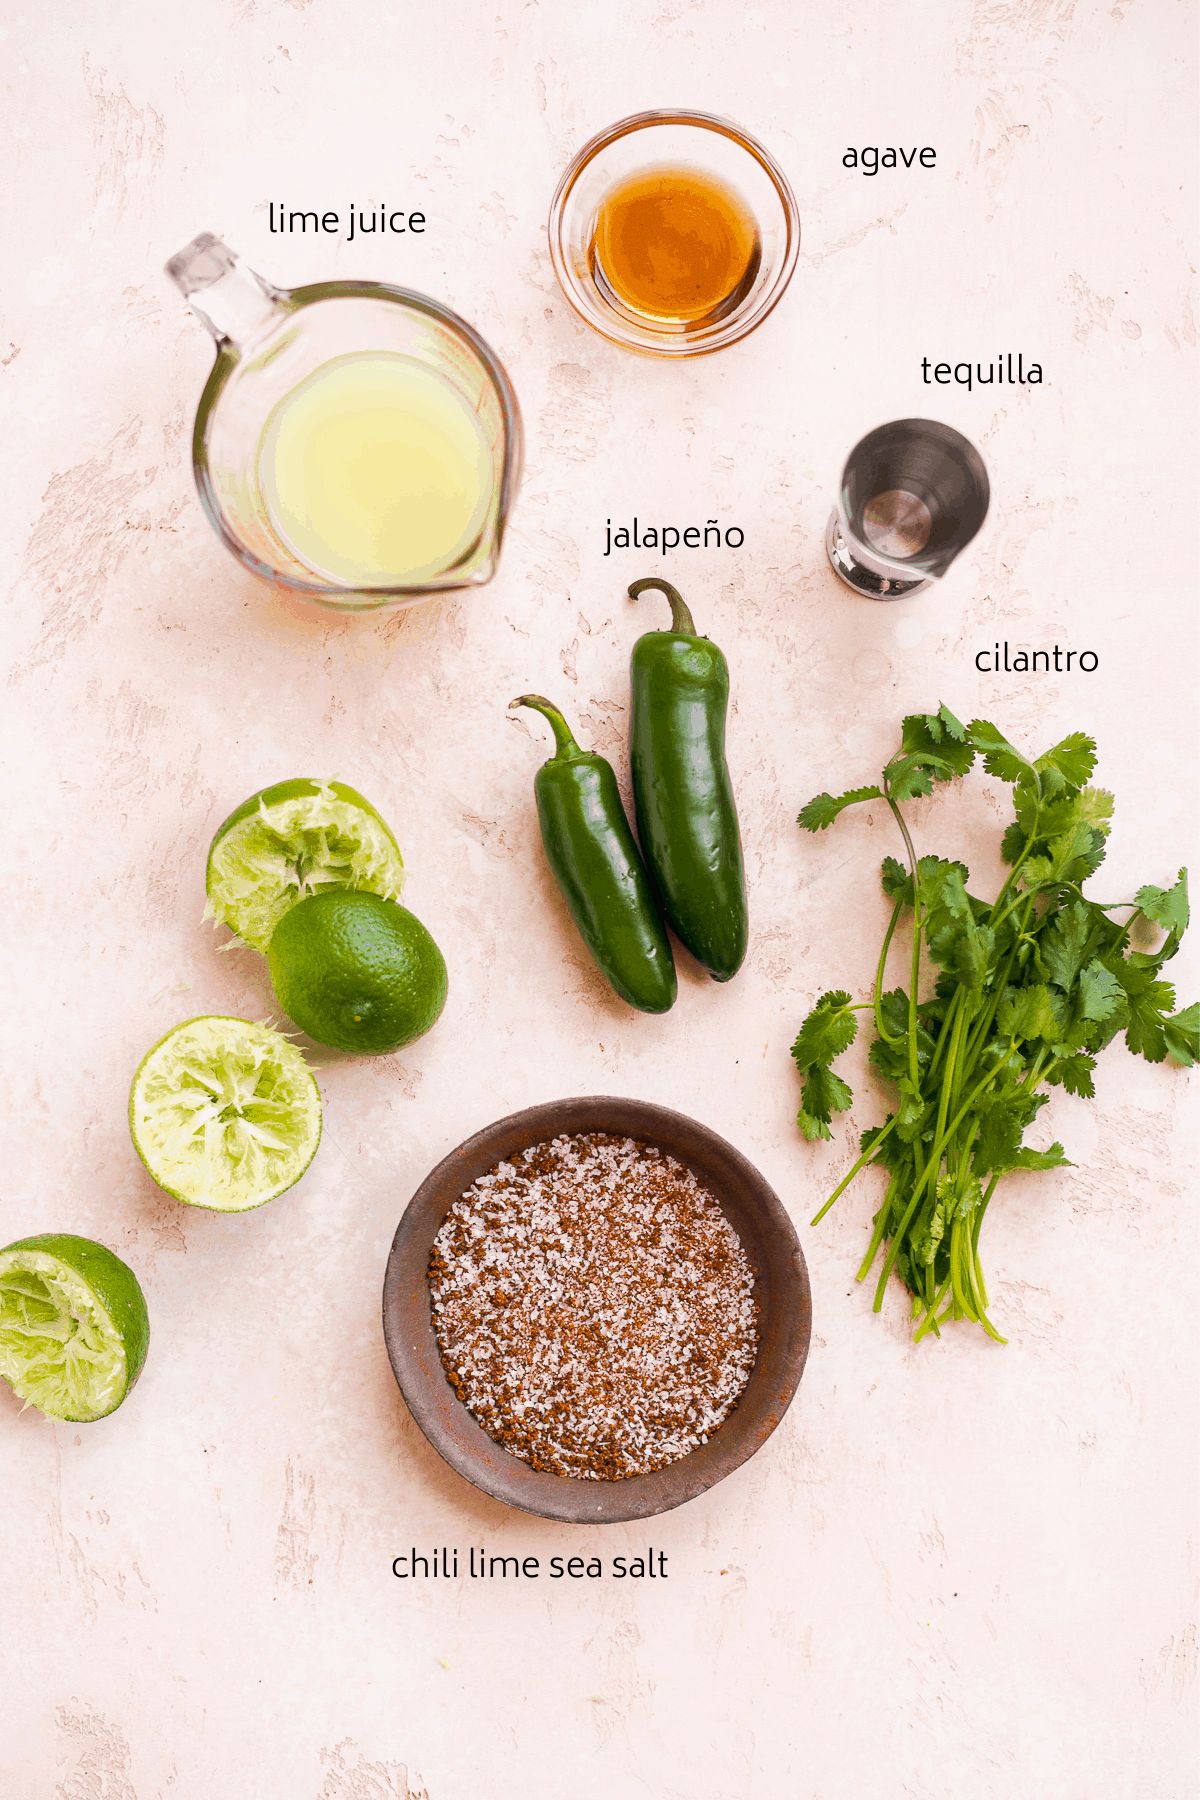 Image of cocktail ingredients with black labels on a dusty pink surface including limes, cilantro, and jalapeño.